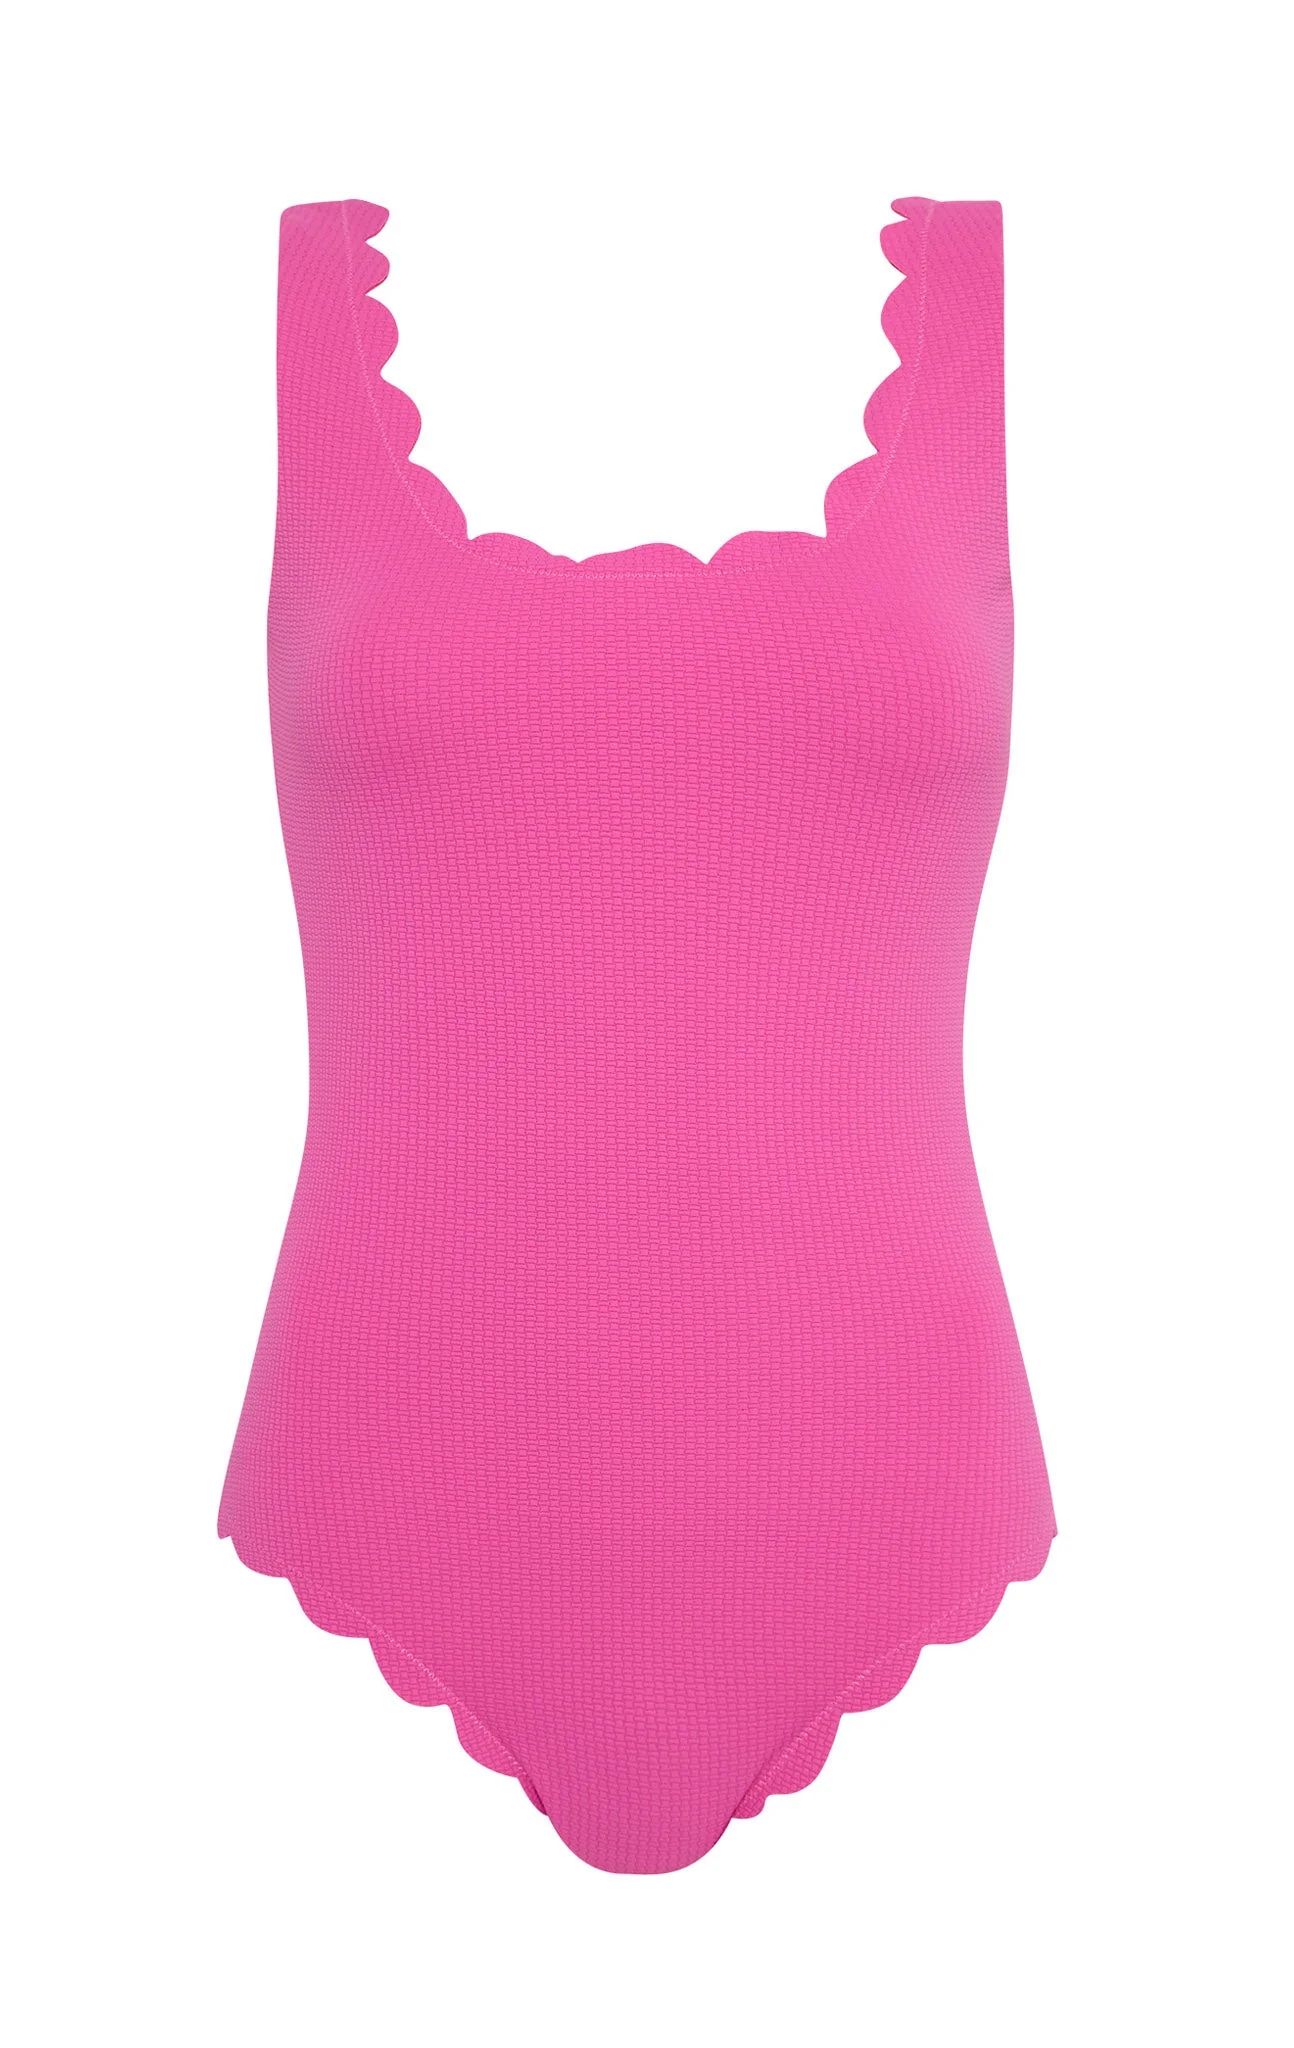 Long Torso Palm Springs Maillot in Orchid | Marysia Swim